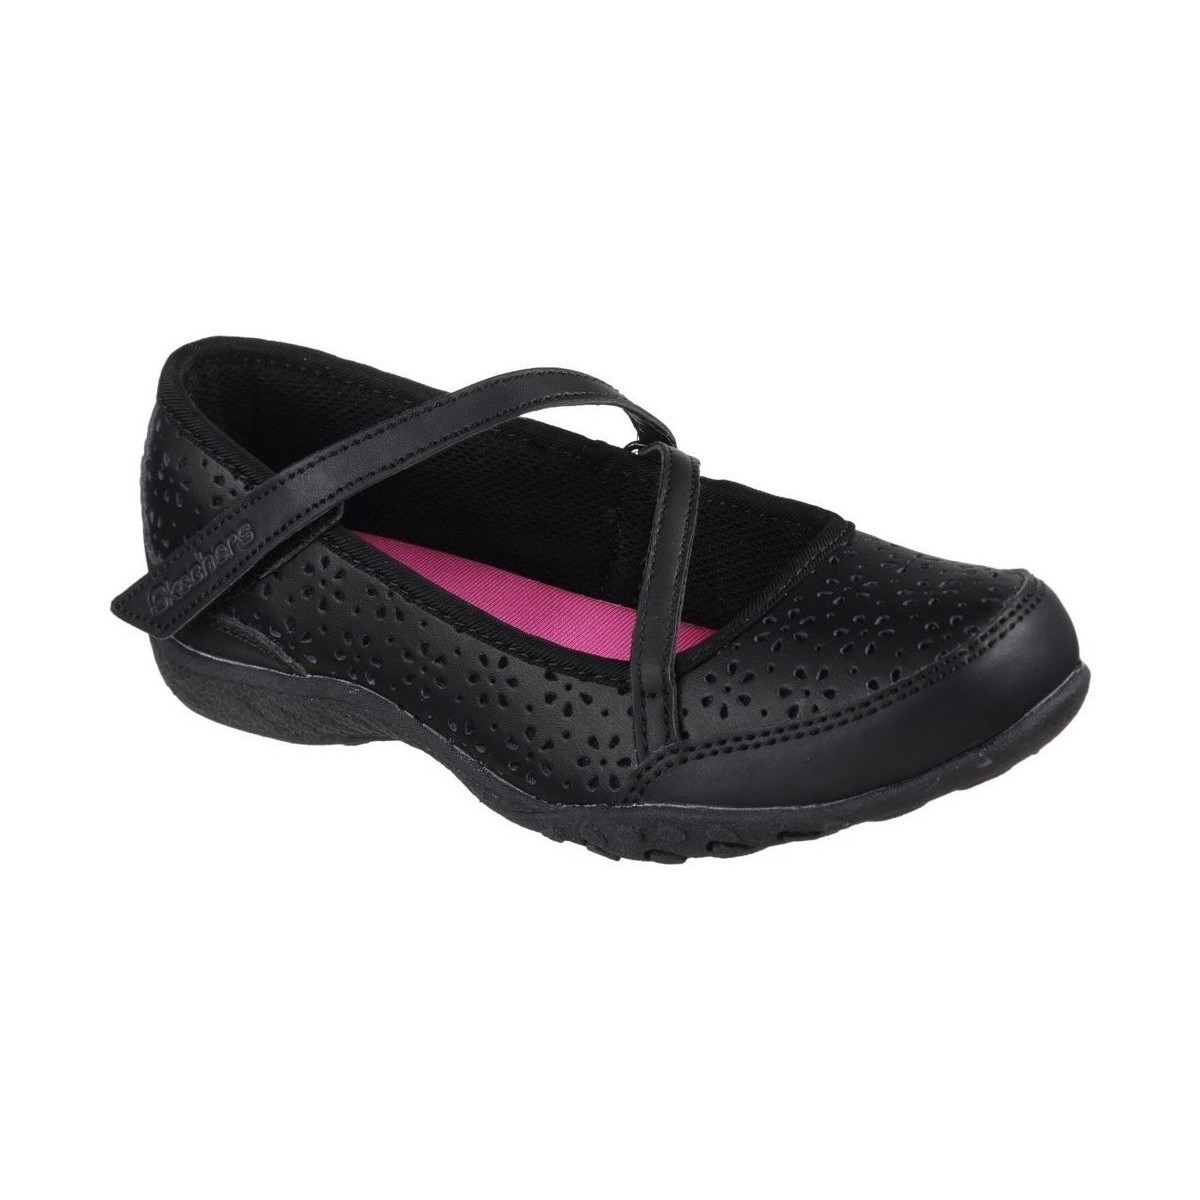 Shoes Girl Boots Skechers Breathe-Easy Playground Poppies Girls Shoes Black